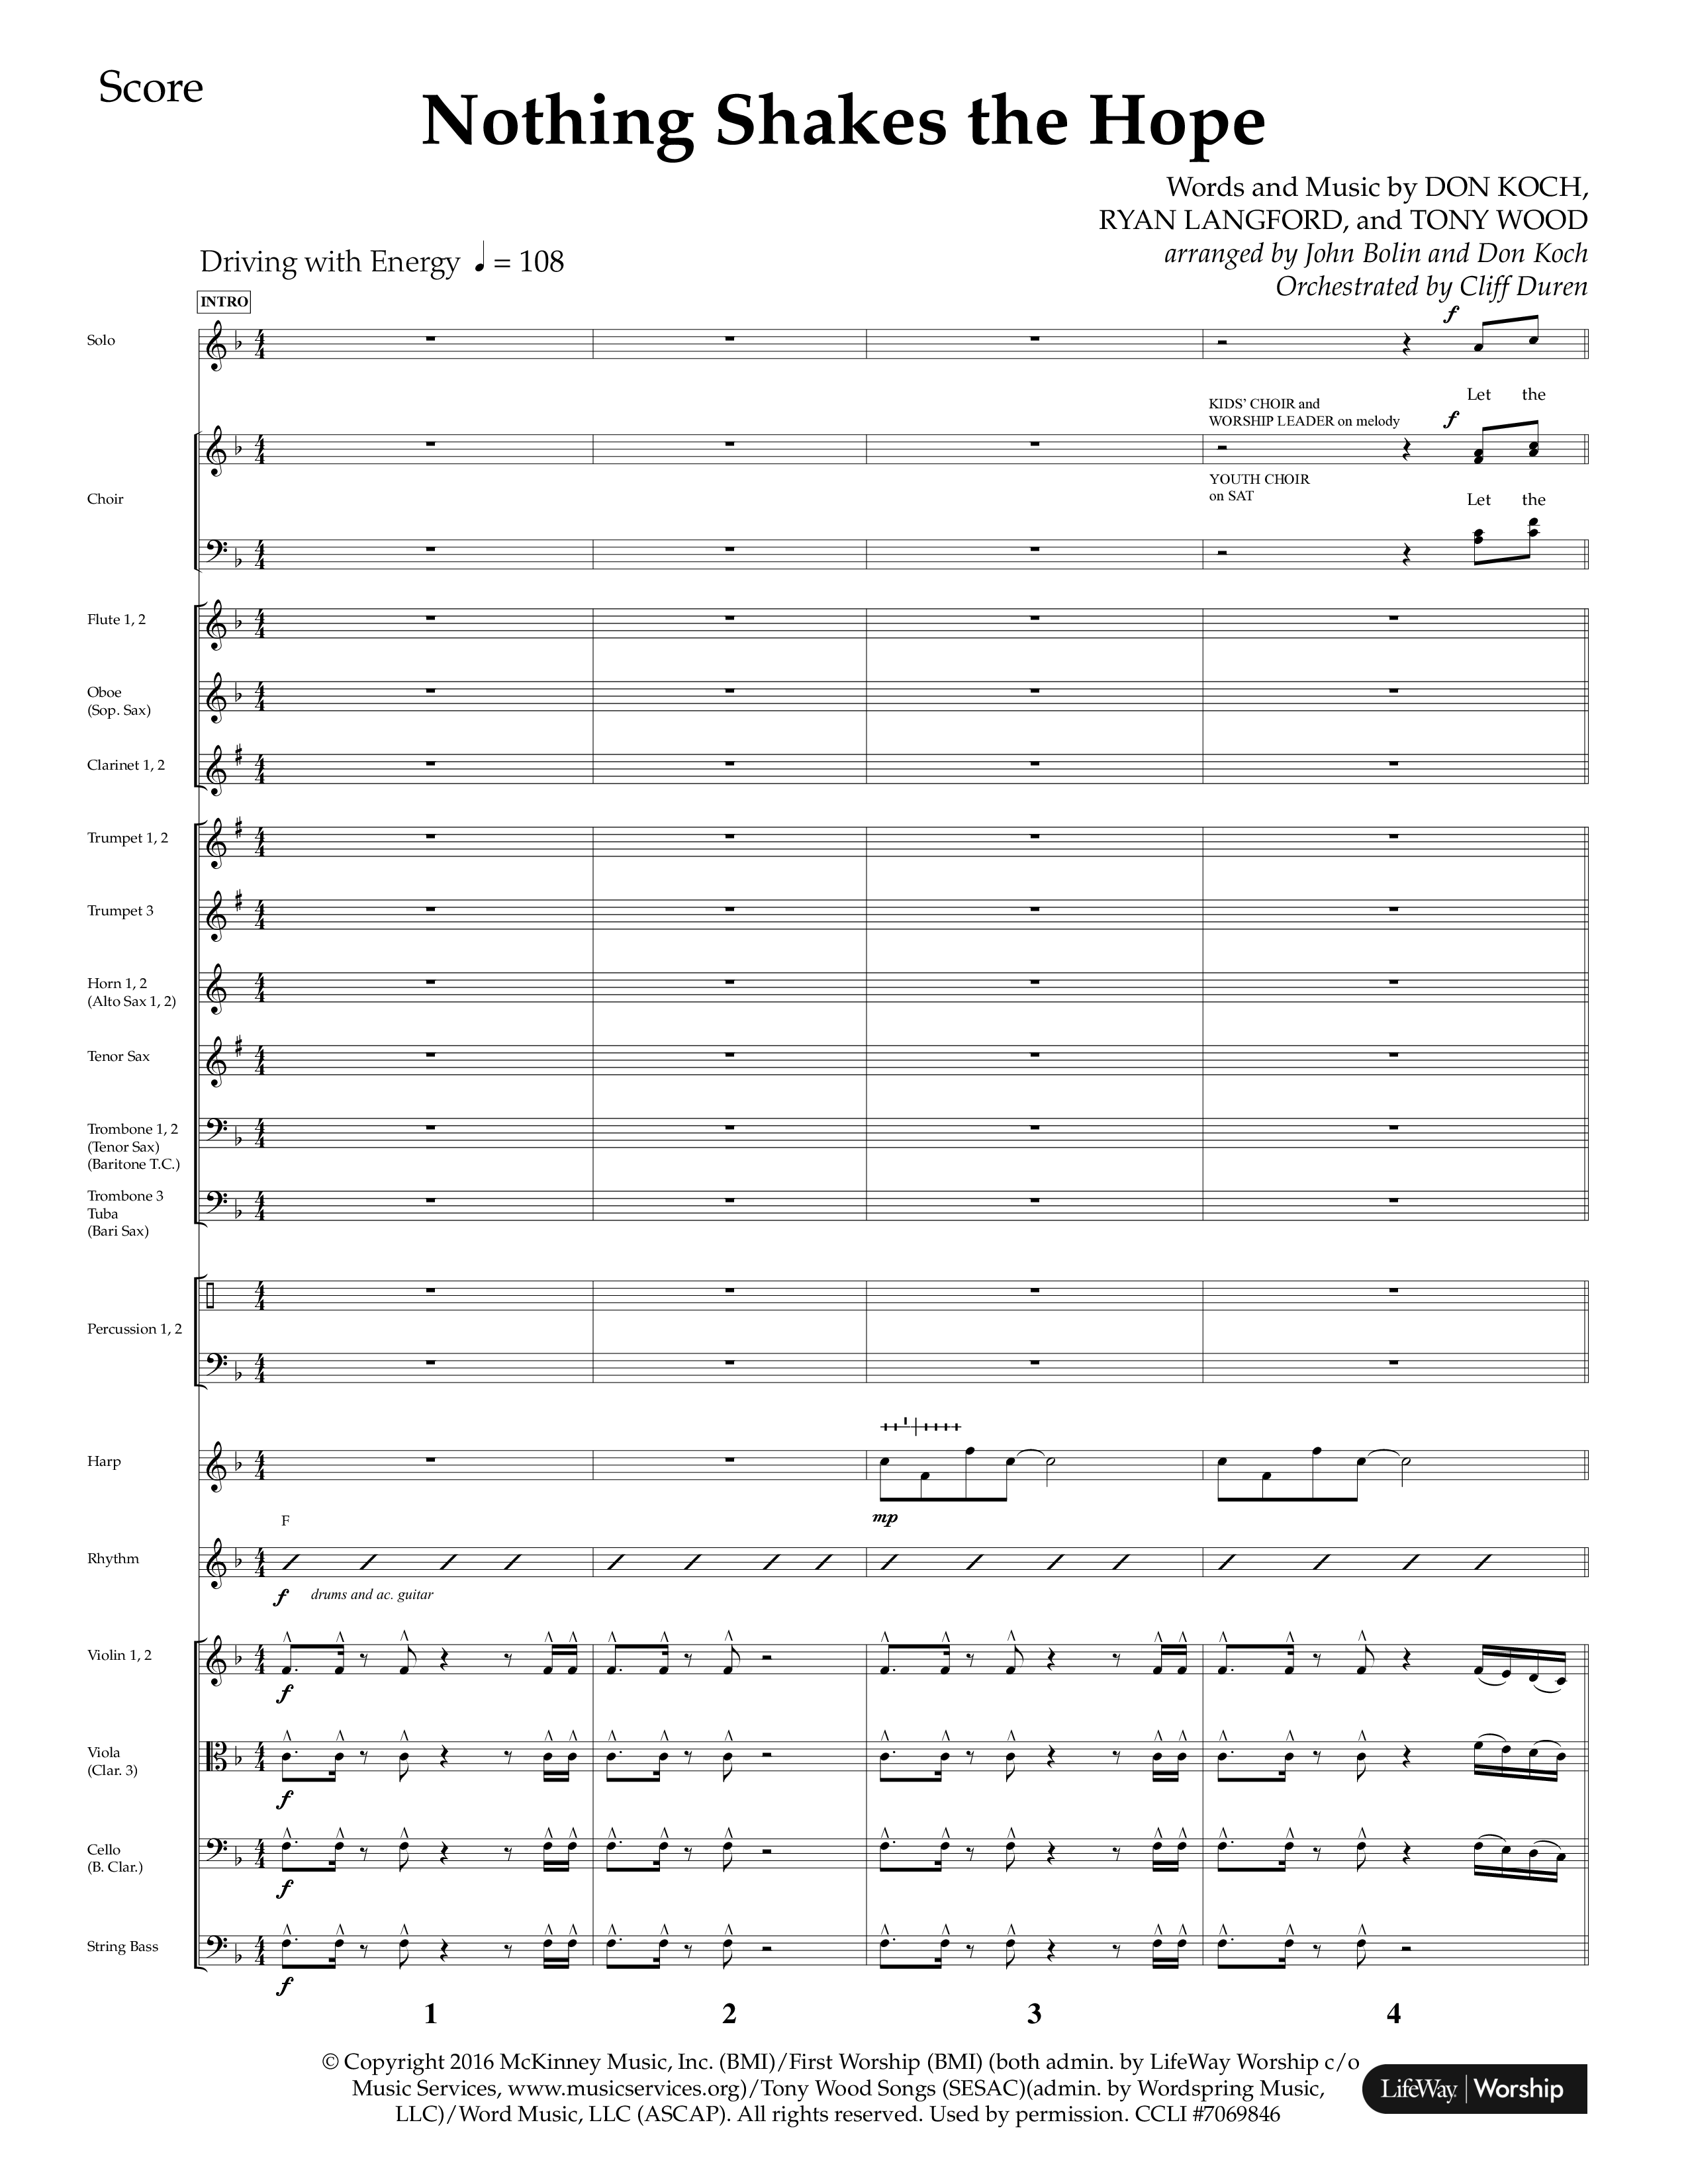 Nothing Shakes The Hope (Choral Anthem SATB) Conductor's Score (Lifeway Choral / Arr. John Bolin / Arr. Don Koch / Orch. Cliff Duren)